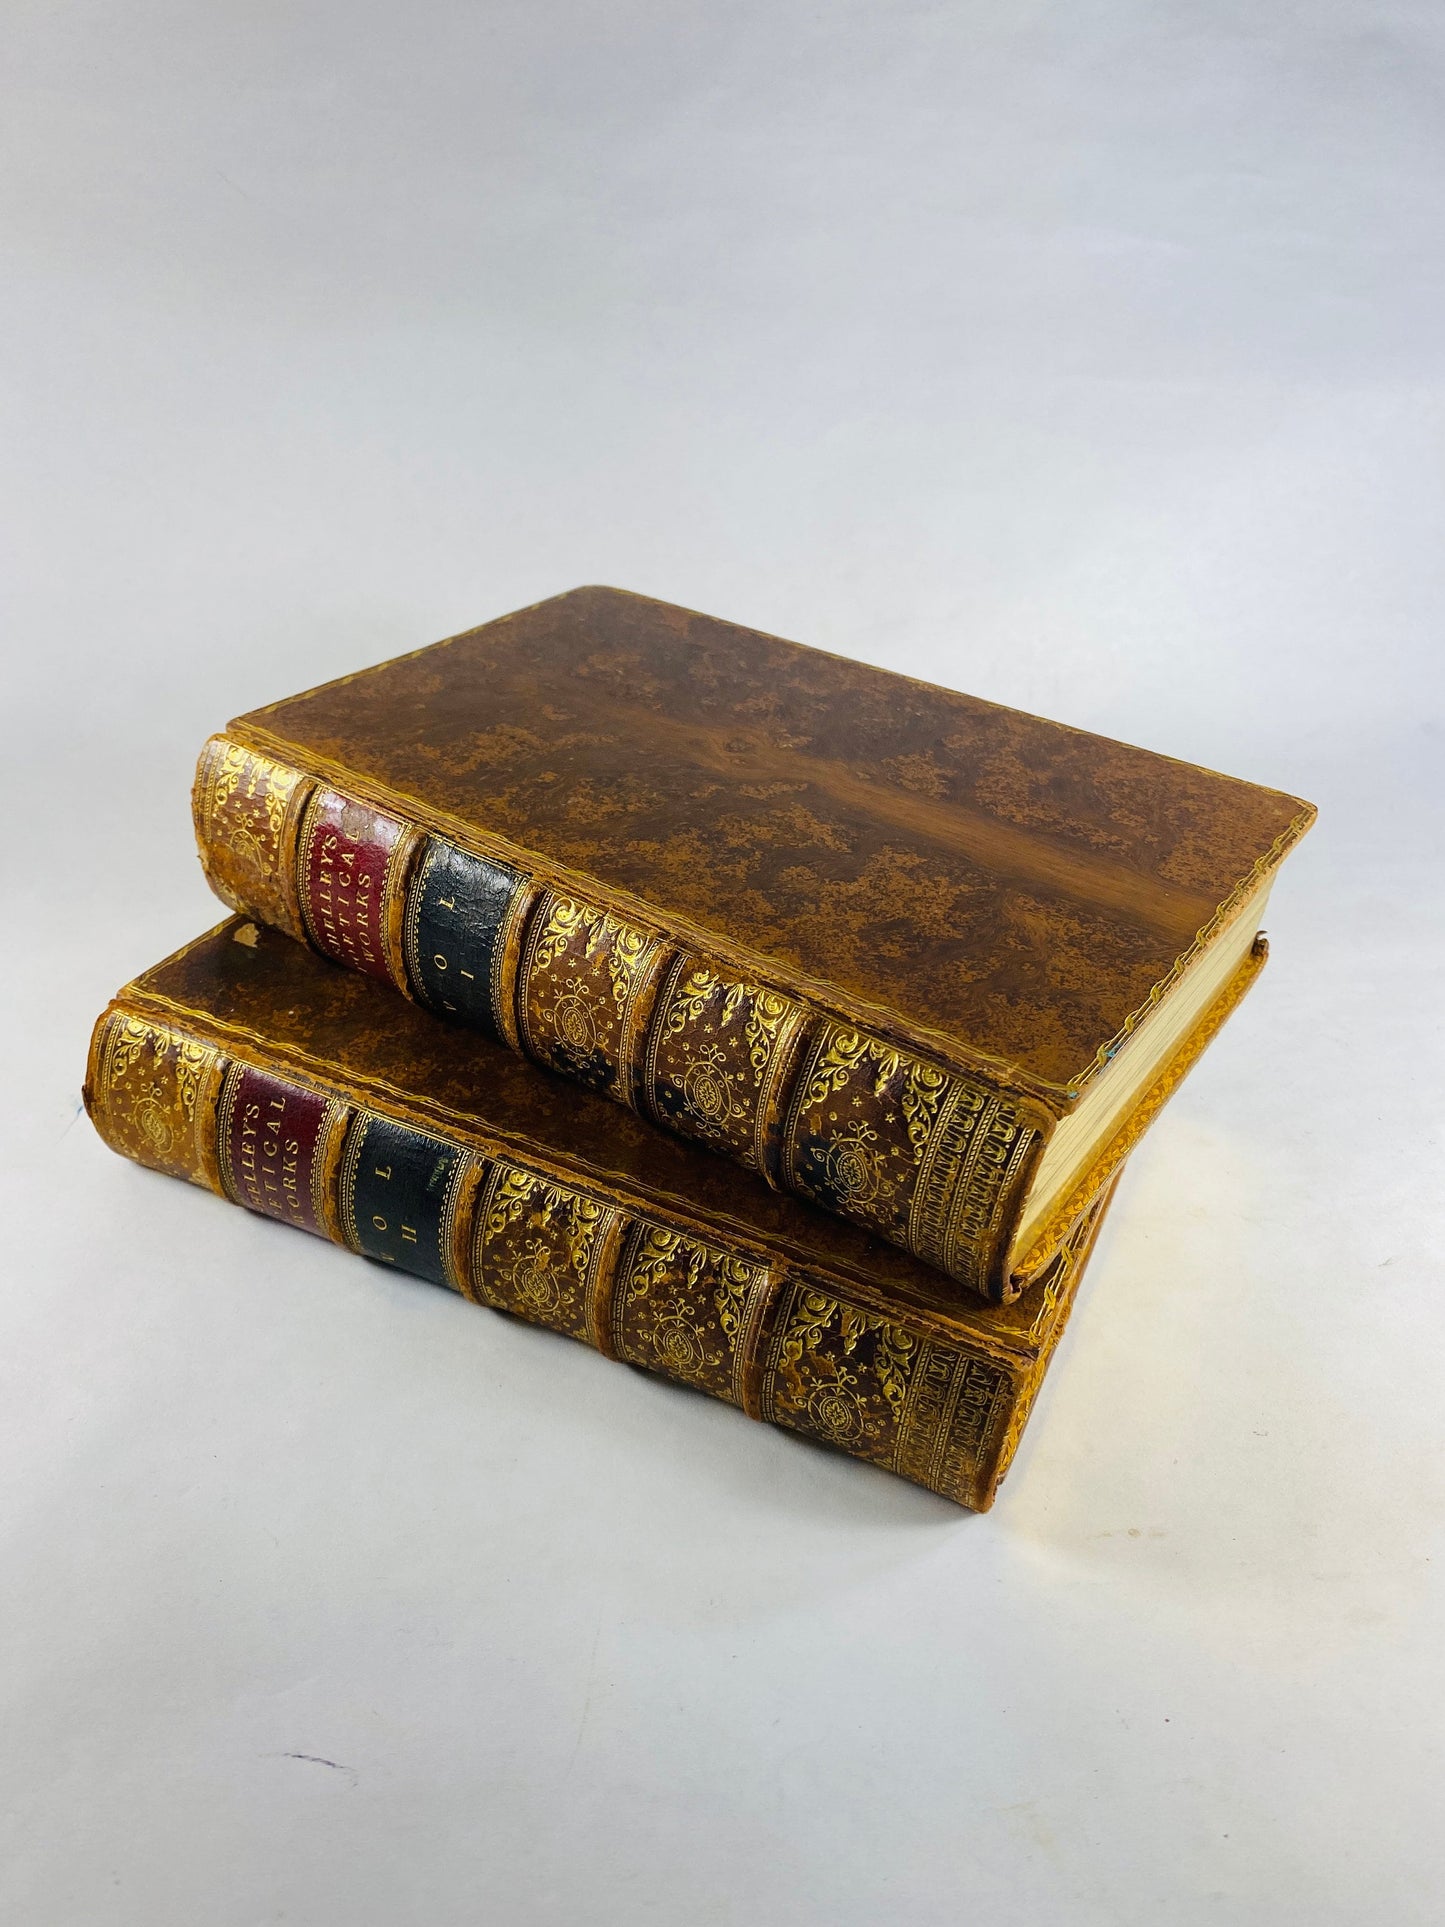 Poetical Works of Percy Bysshe Shelley antique set circa 1886 Vintage poetry books with brown leather, marbeled boards Adonais & other poems